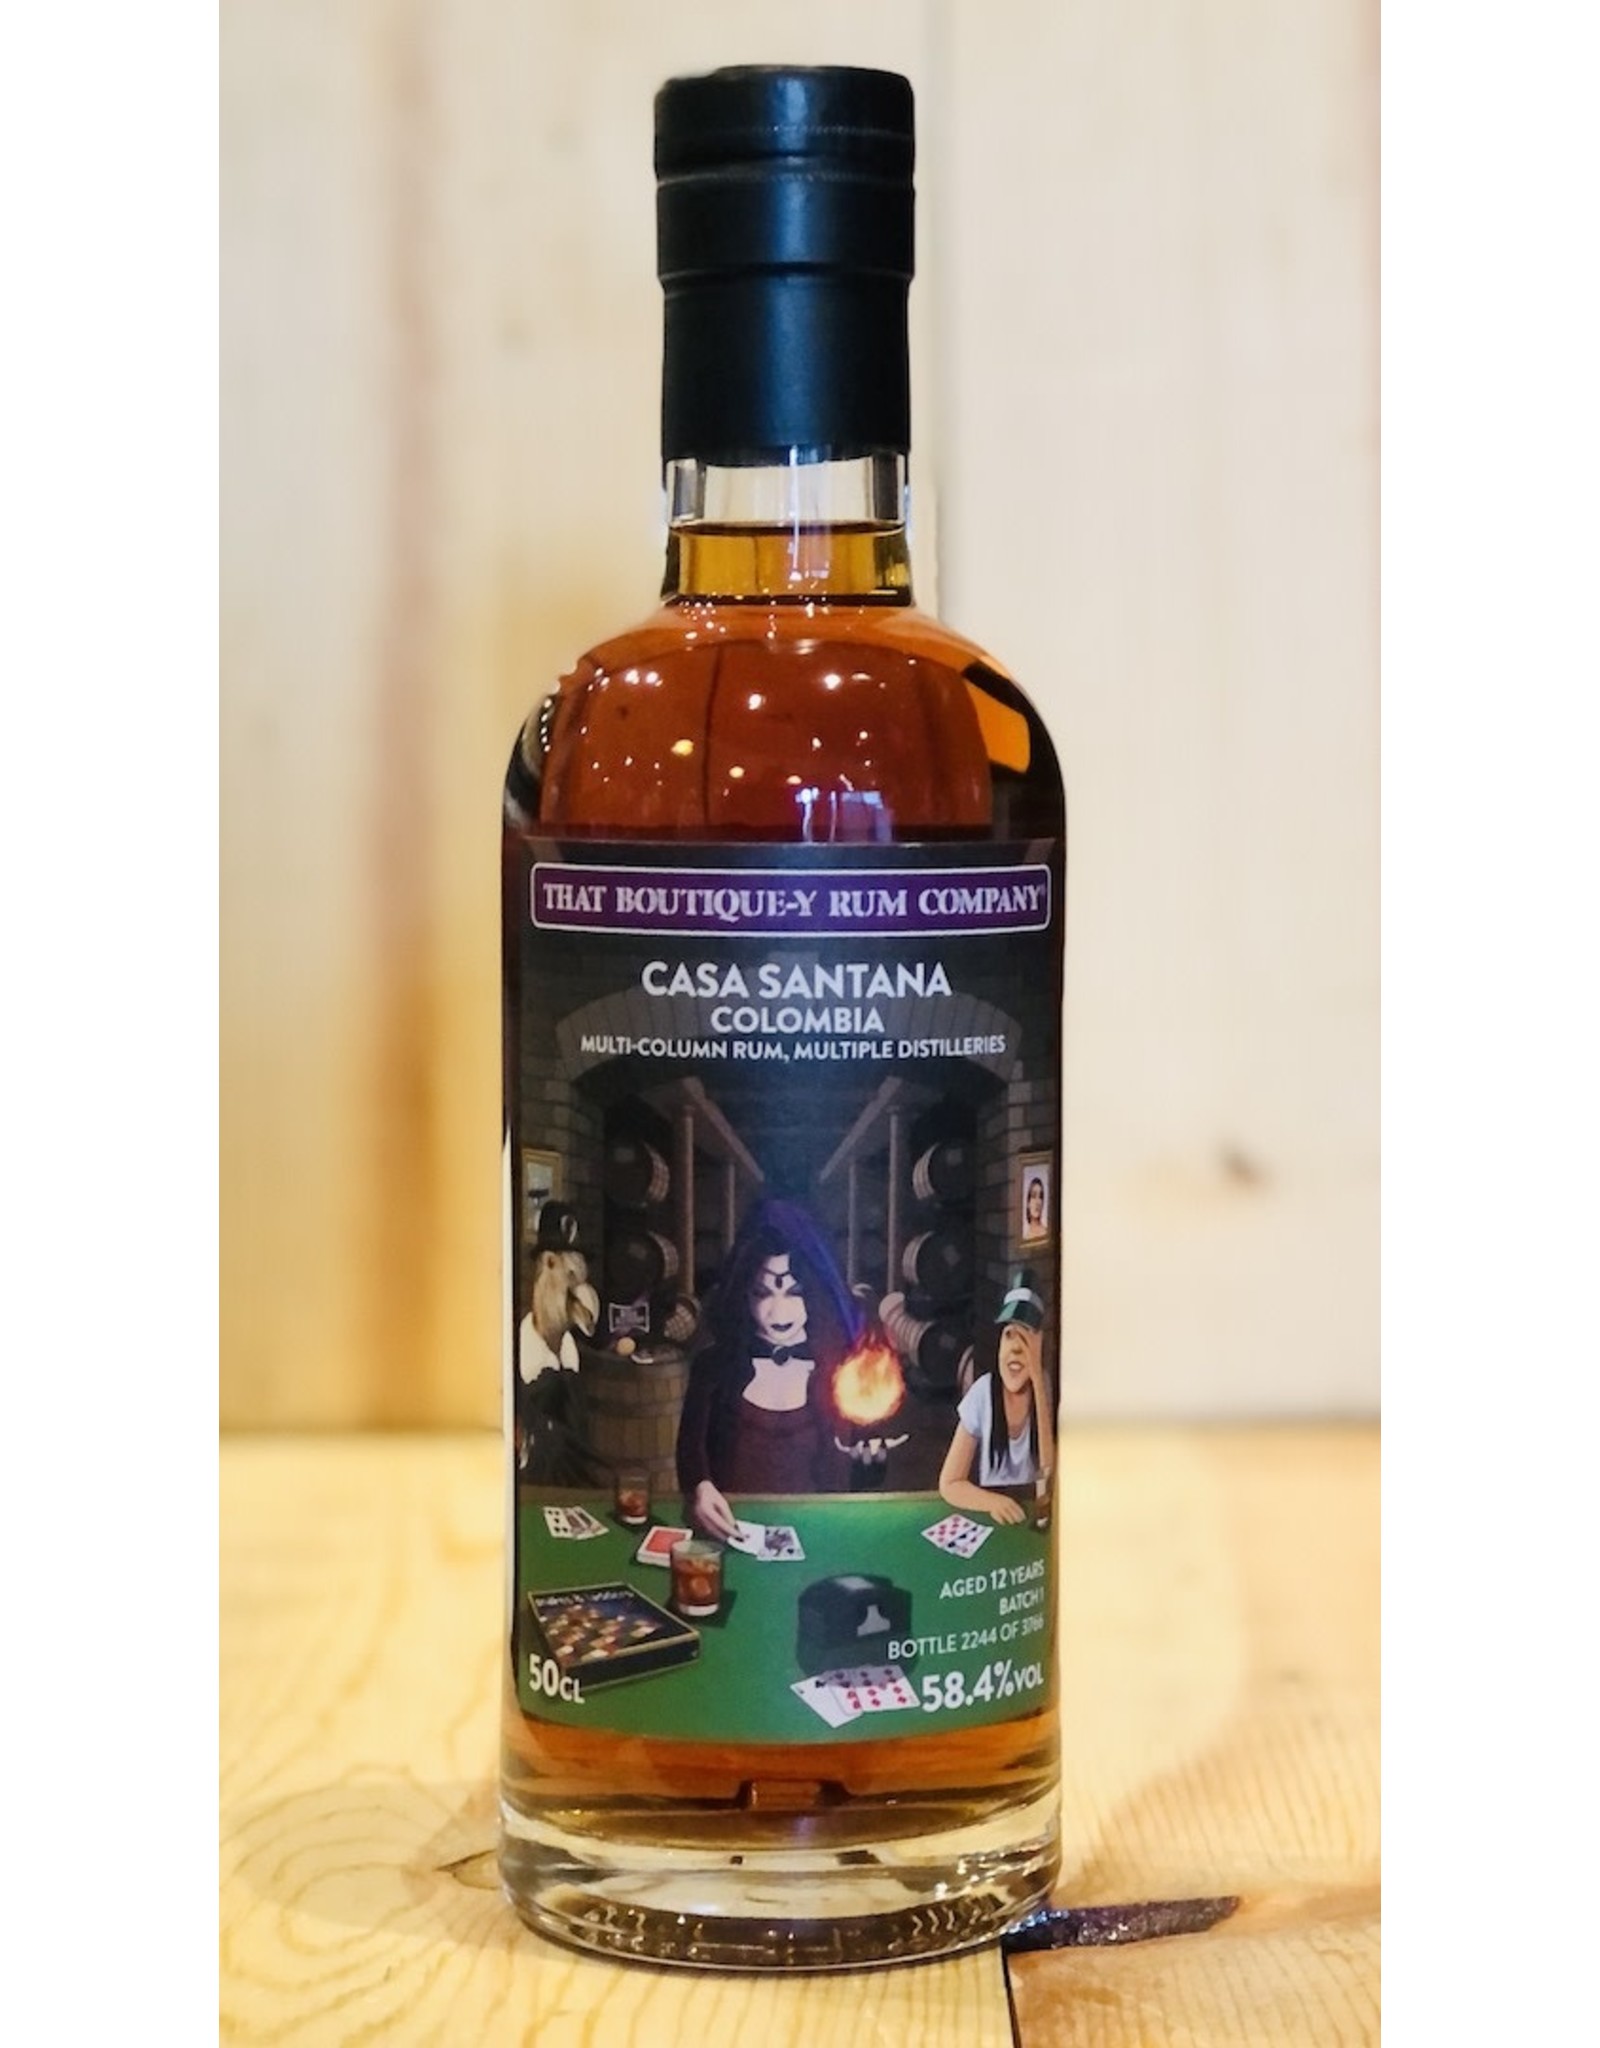 Spirits That Boutique-Y Casa Santana Colombia 12 Year Old Rum